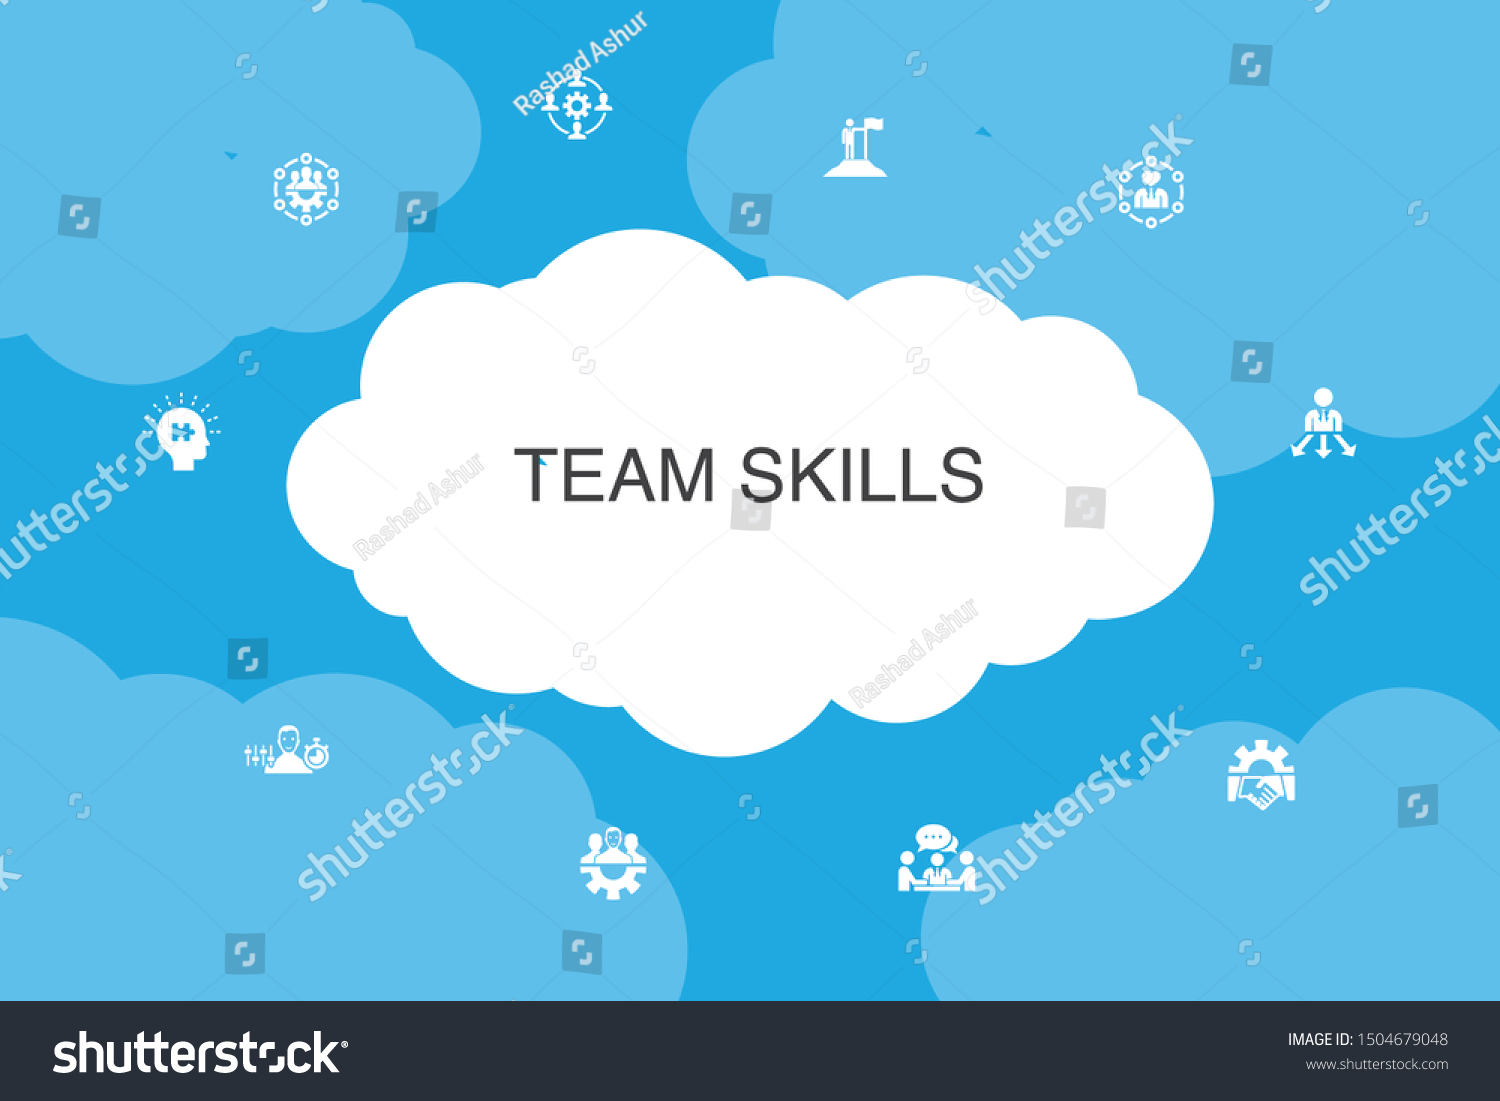 Team Skills Infographic Cloud Design Templatecollaboration Stock Vector Royalty Free